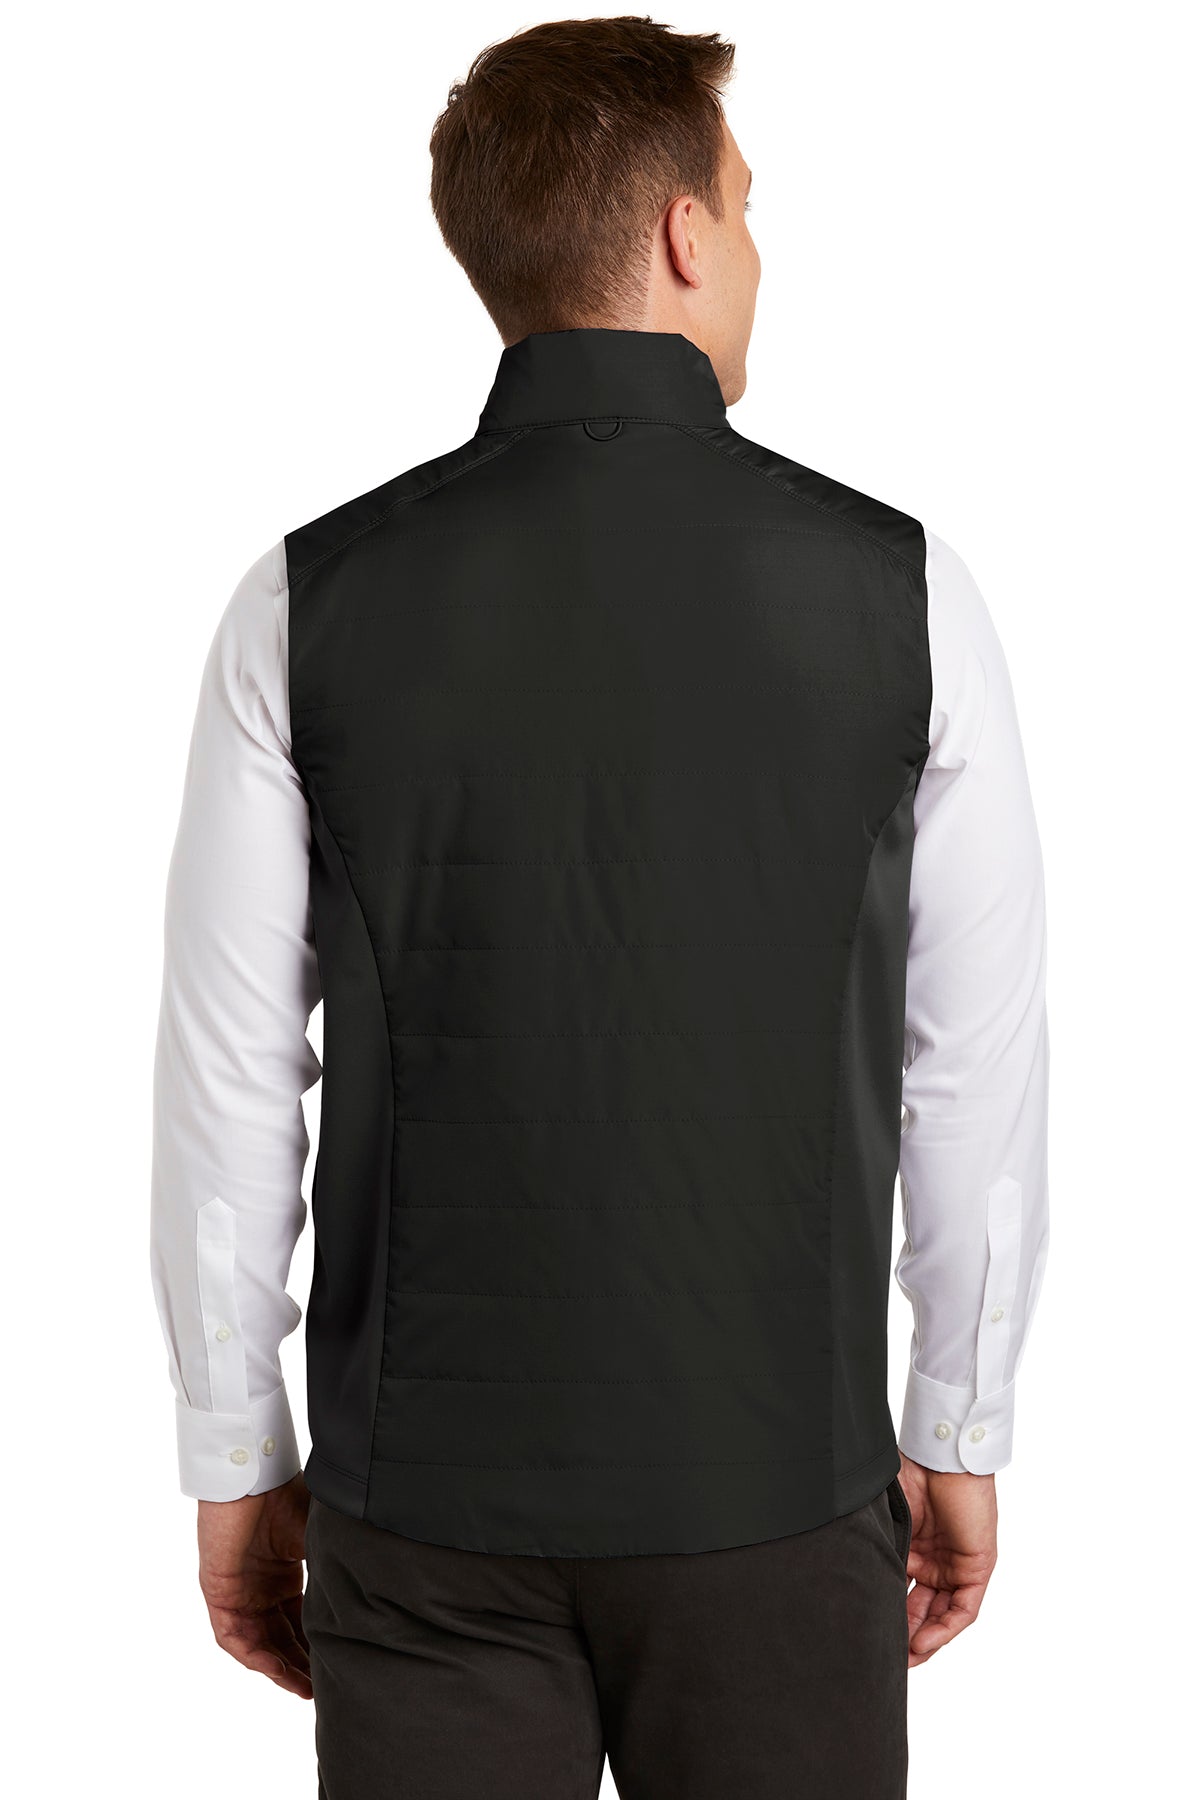 Windsor - Collective Insulated Vest with W - Black - Southern Grace Creations